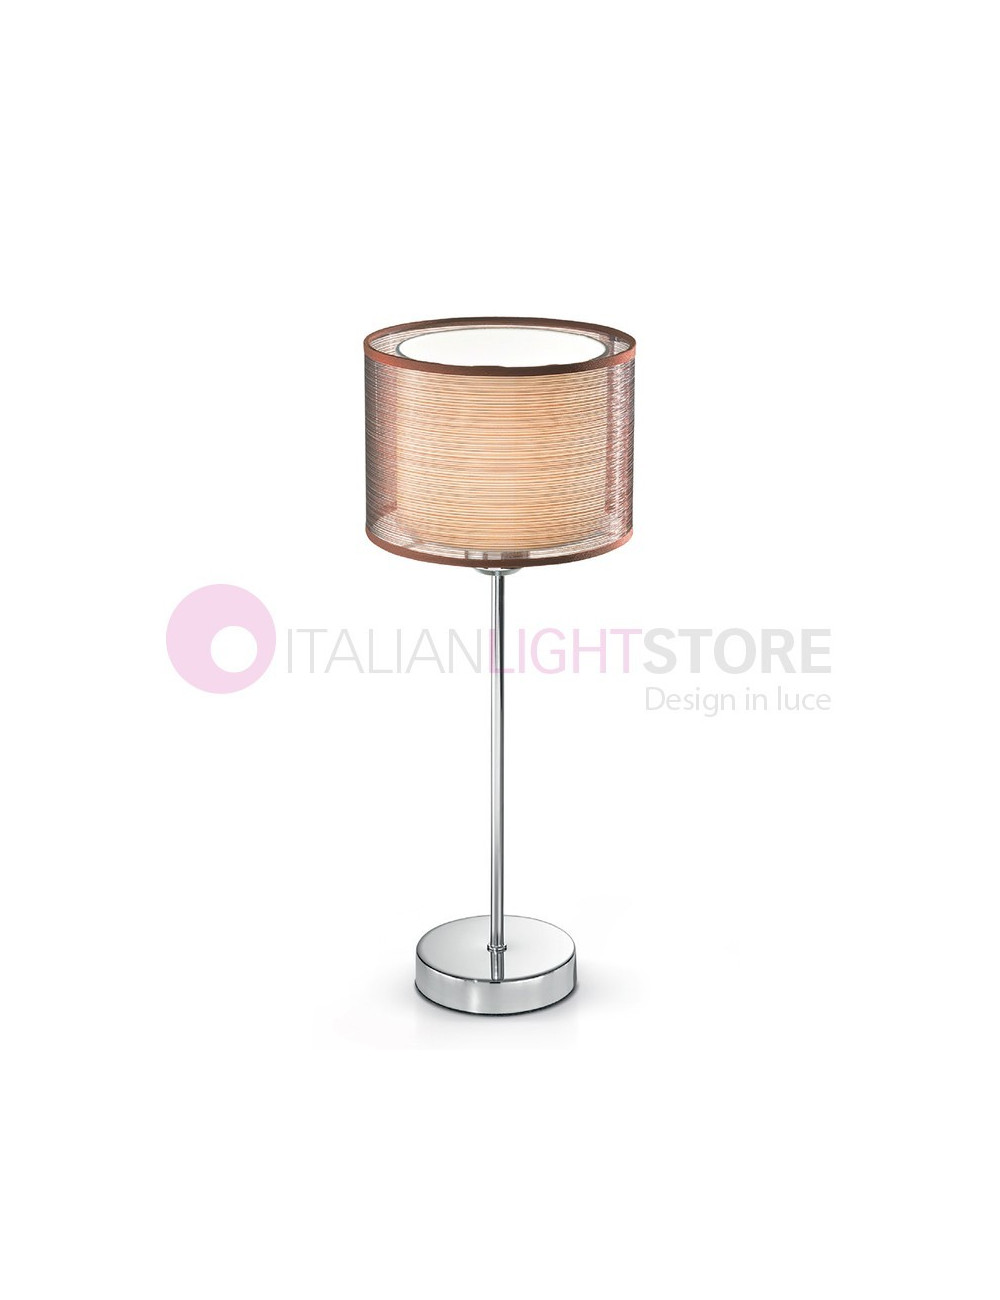 ITHACA lamp table lamp Table Modern with Double lamp Shade | Perenz